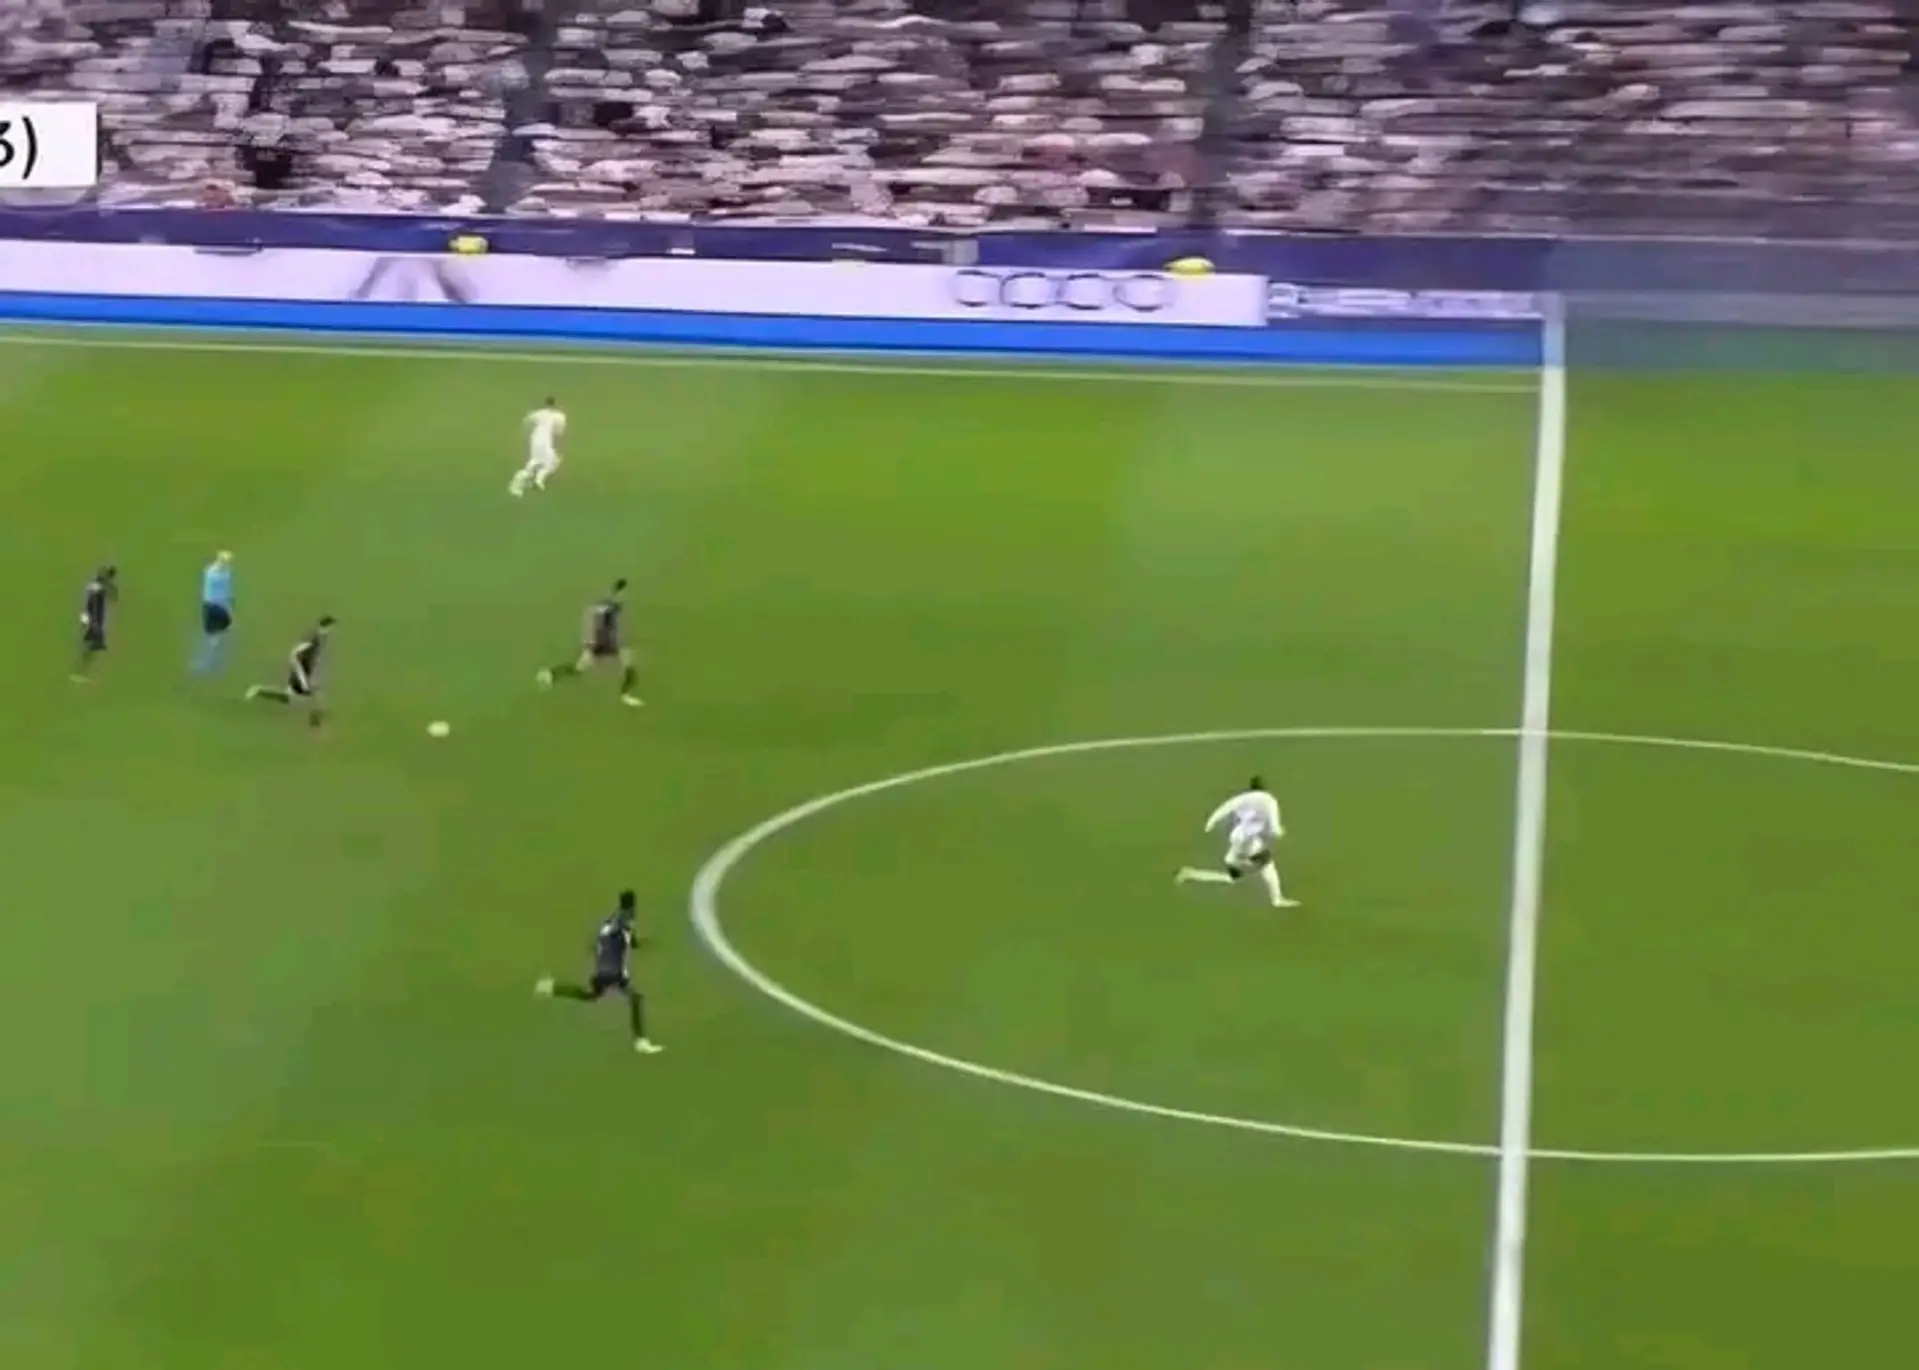 This Mendy defence here isn't talked about enough. He literally clutch